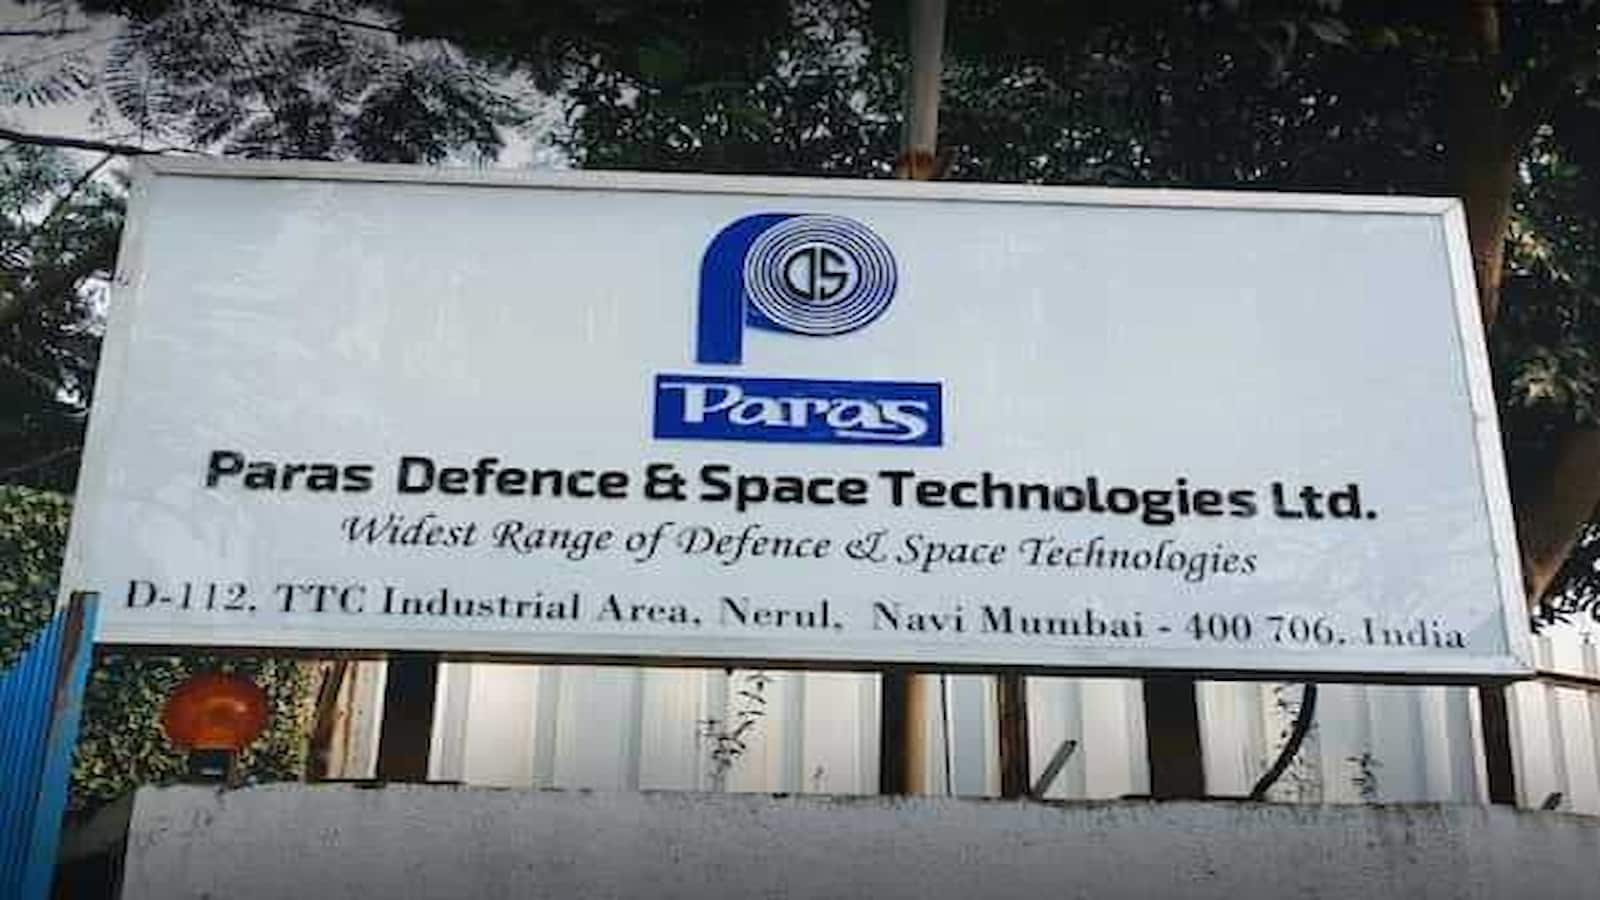 Paras Defence & Space Technologies stock